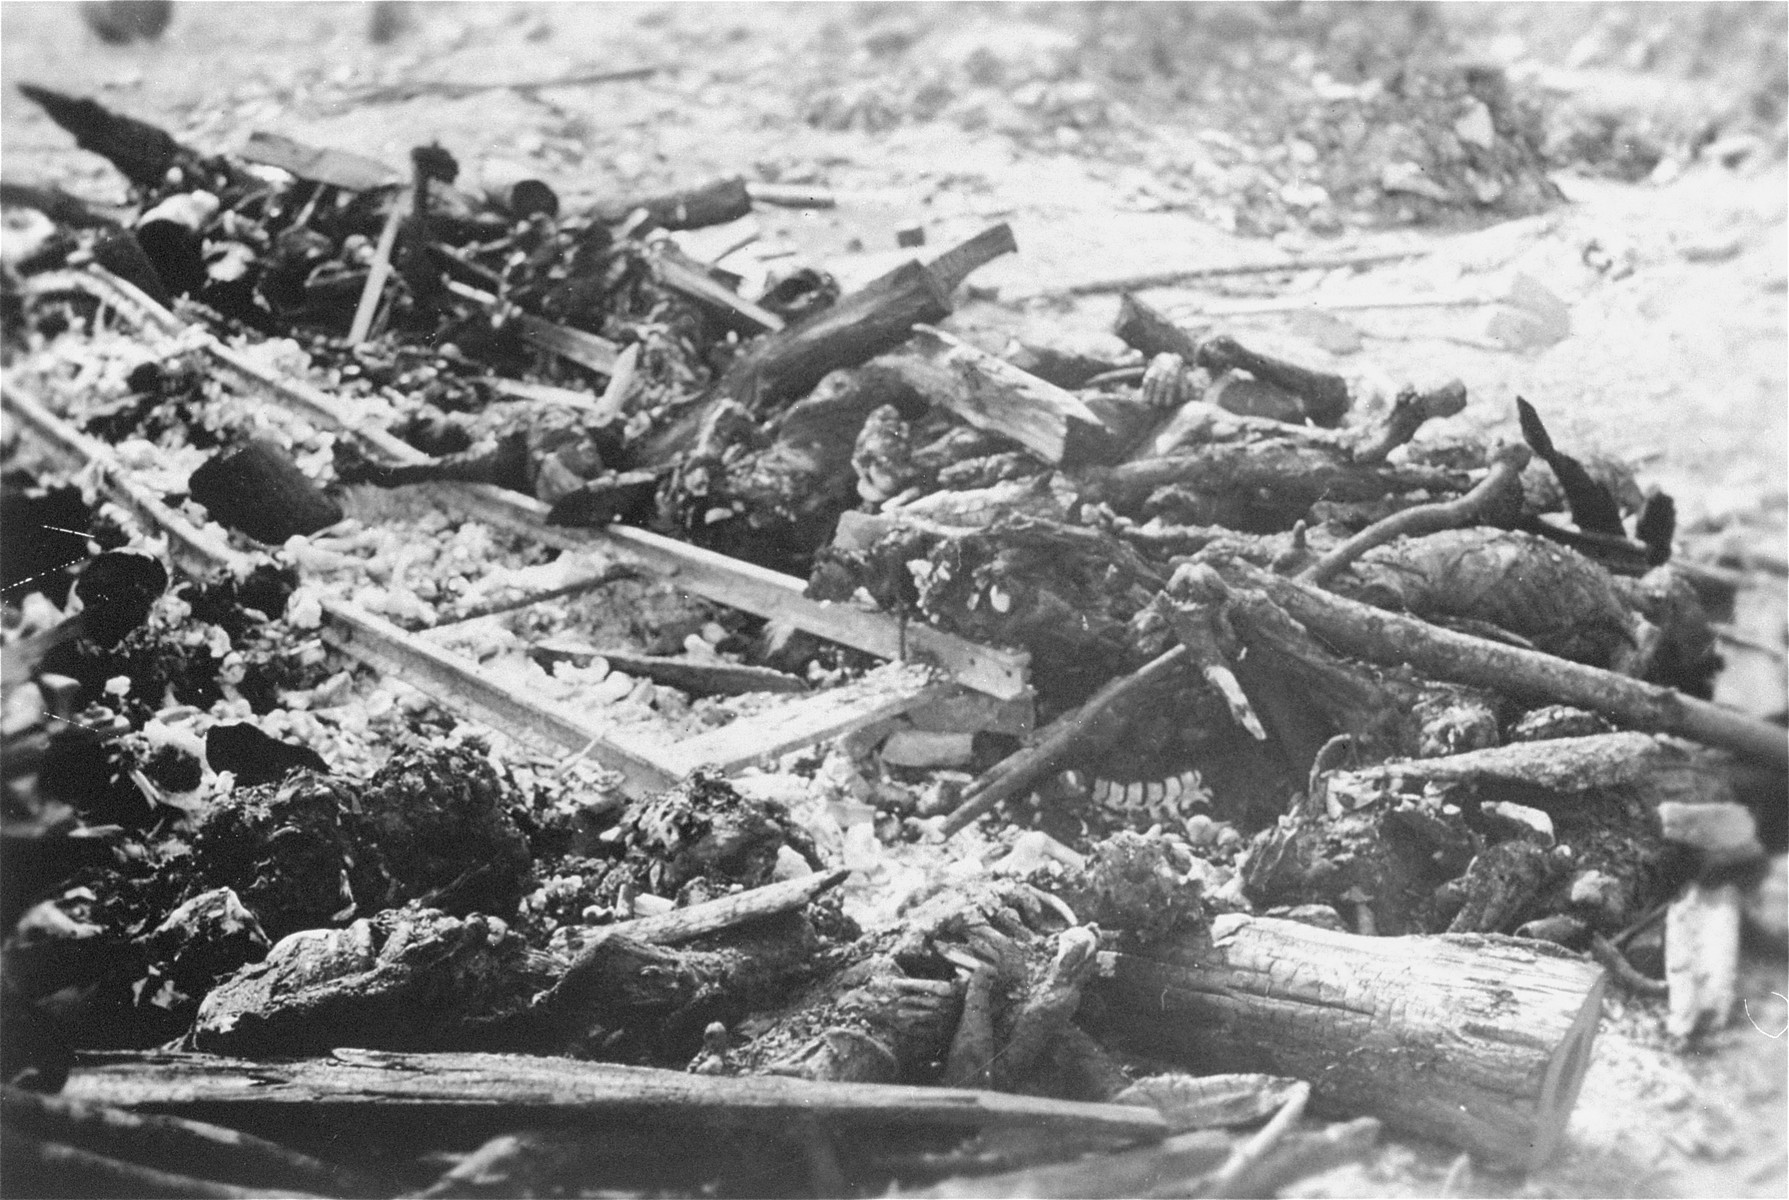 The charred remains of corpses burned by the SS prior to the evacuation of the Ohrdruf concentration camp.